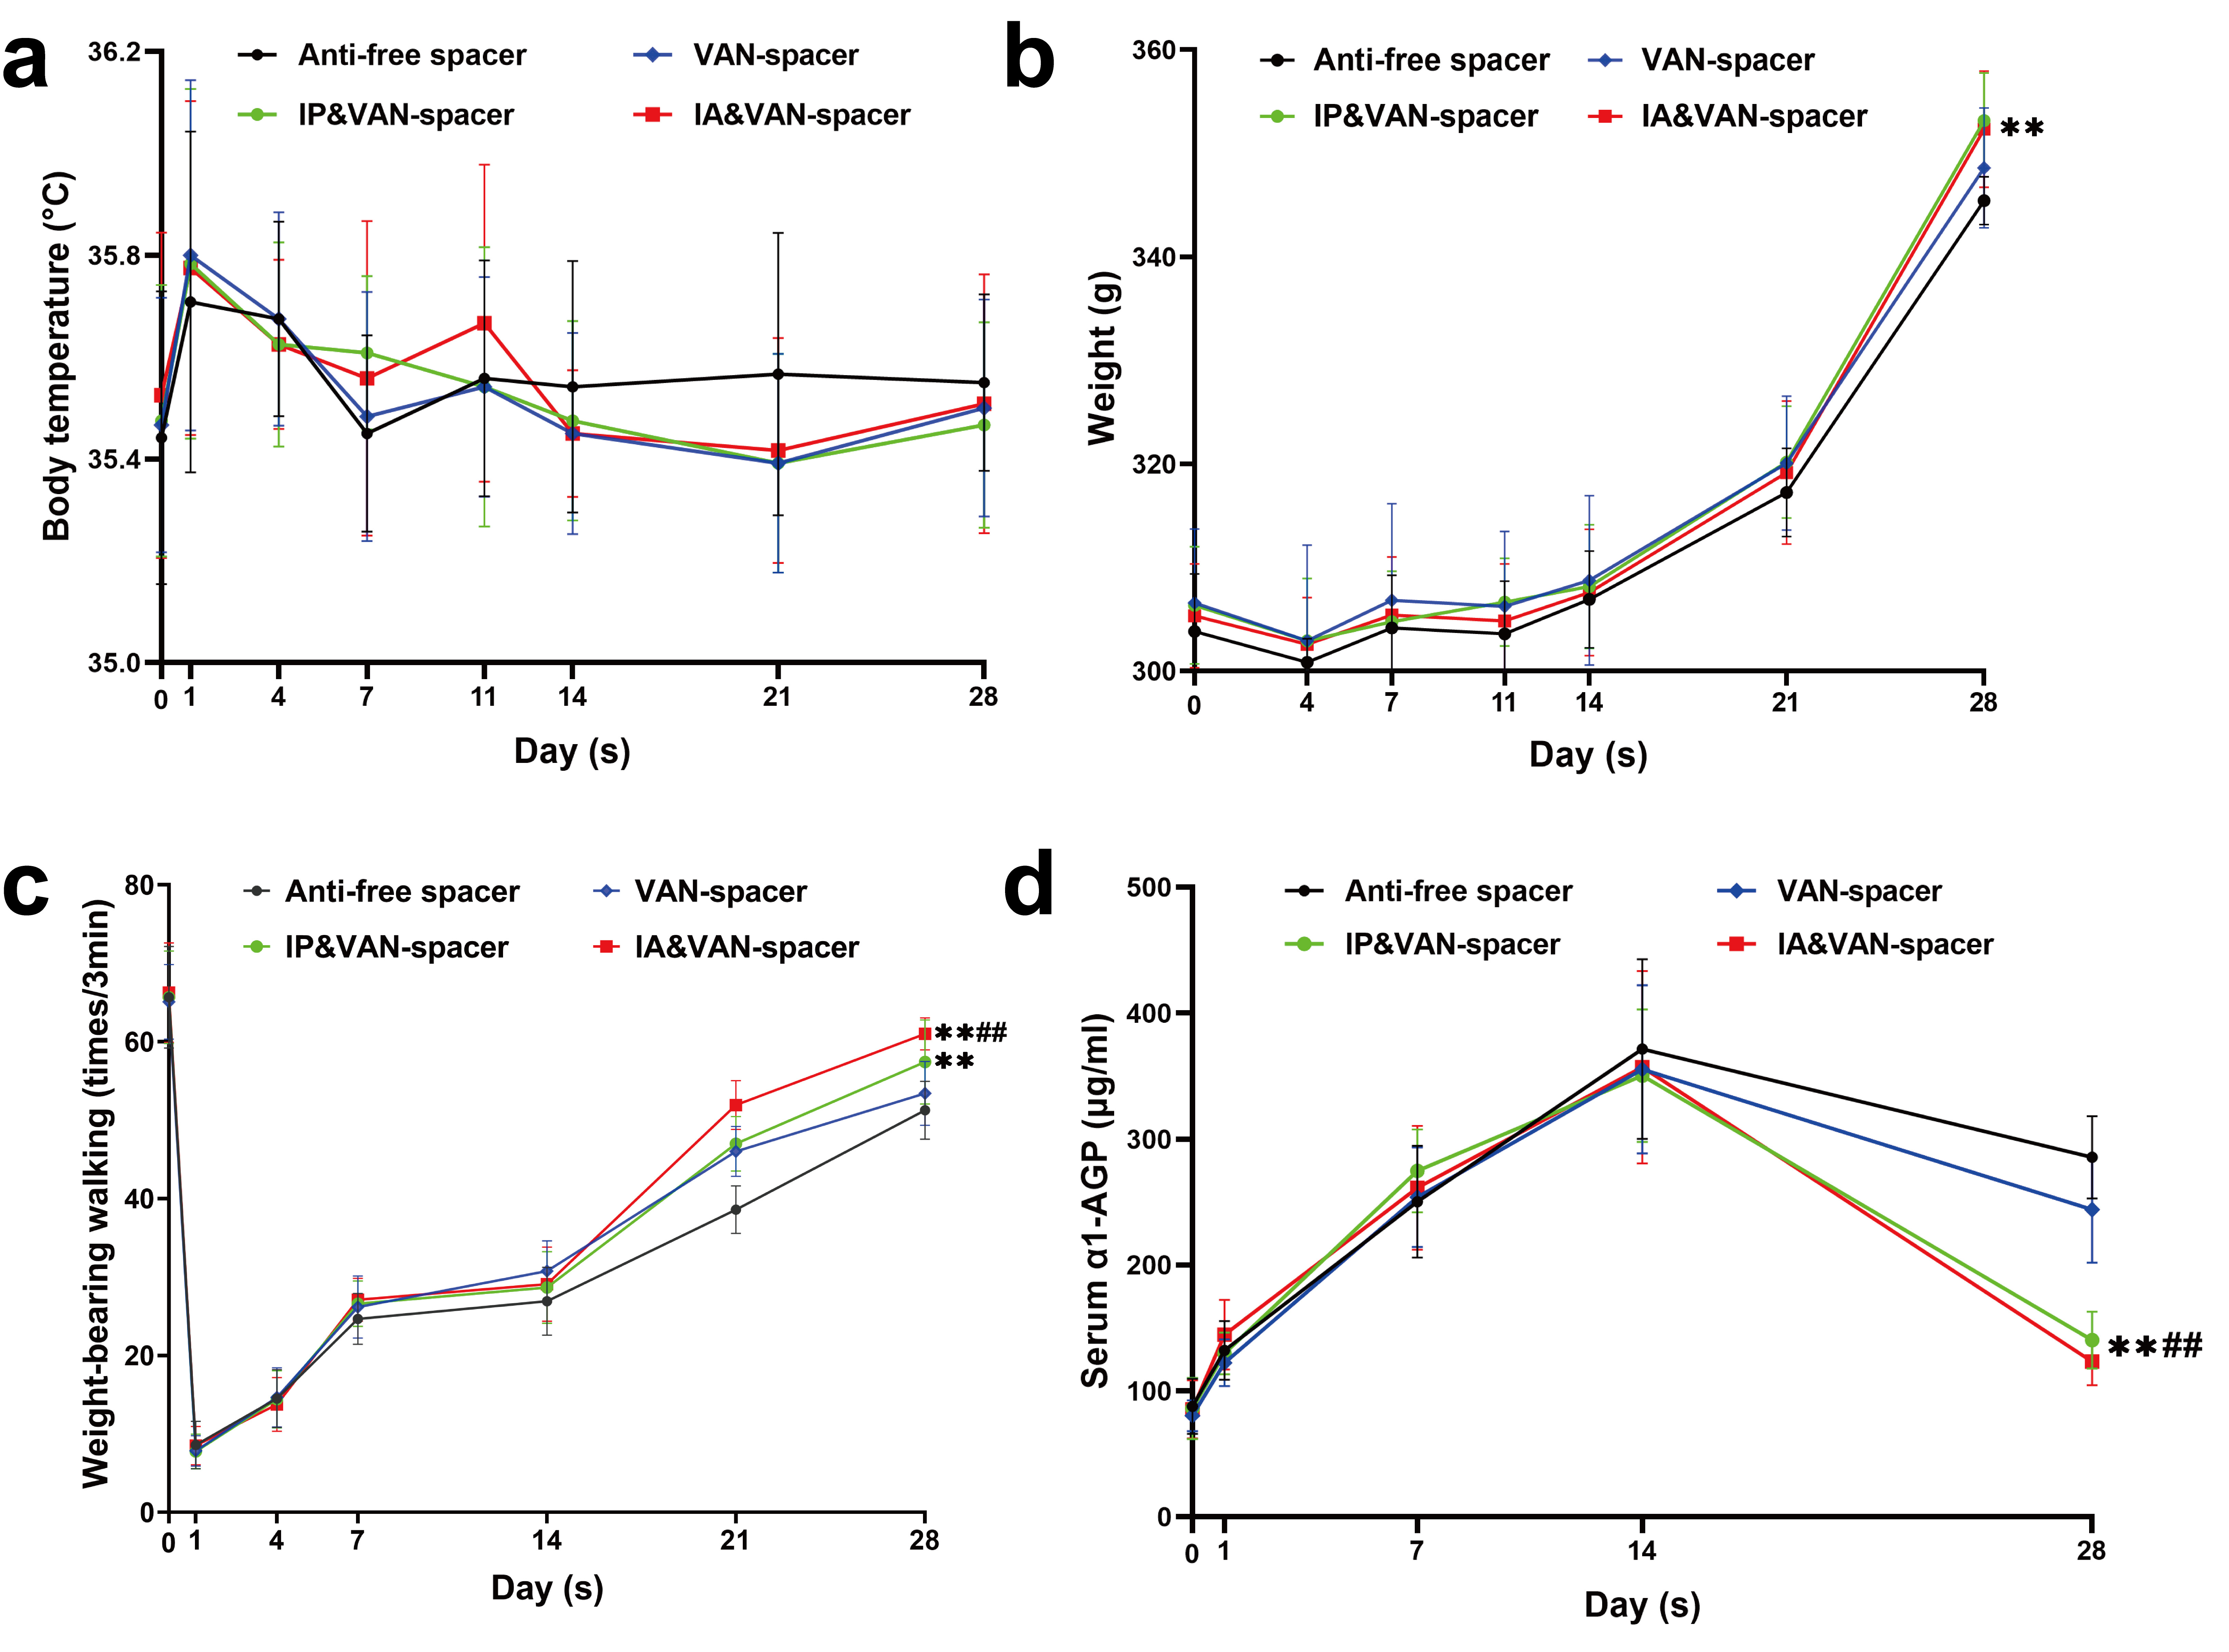 Fig. 2 
            Changes in the general status and serum inflammatory markers of rats from different treatment groups throughout the experiment. a) Changes in body temperature of rats were detected from four treatment groups throughout the experiment (within 28 days). An electronic animal thermometer and infrared thermometer were used to measure the anal and rectal temperatures of rats preoperatively (day 0) and on postoperative days 1, 4, 7, 11, 14, 21, and 28. n = 13. b) The body weights of rats in each group were recorded using an electronic scale preoperatively (day 0) and on postoperative days 4, 7, 11, 14, 21, and 28; n = 13. c) Changes in weightbearing activities for the right knee of rats were observed via their daytime weightbearing activities, which were monitored in a large carton using video software on an iPhone 10 (Apple, USA). The weightbearing incidences, when the right foot made contact with the ground during a three-minute period were recorded and analyzed preoperatively (day 0) and on postoperative days 1, 4, 7, 14, 21, and 28; n = 6. d) Changes in serum alpha-1-acid glycoprotein (α1-AGP) levels were detected in each treatment group throughout the experiment, measured on days 0, 1, 7, 14, and 28, n = 6. The four treatment groups were as follows: Control (antibiotic-free cement spacer); Van-Cement spacer (4 g vancomycin per 40 g cement powder); IP & Van-Cement spacer (4 g vancomycin per 40 g cement powder and intraperitoneal (IP) injection of vancomycin, 88 mg/kg, 1 ml, every 12 hours); IA & Van-Cement spacer (4 g vancomycin per 40 g cement powder and intra-articular (IA) injection of vancomycin, 44 mg/kg, 150 µl, once per day). The data in the figures represent the means and standard error of the means. Significance was evaluated using a two-way analysis of variance (ANOVA). **p < 0.01 (compared with Control group), ##p < 0.01 (compared with Van-spacer group).
          